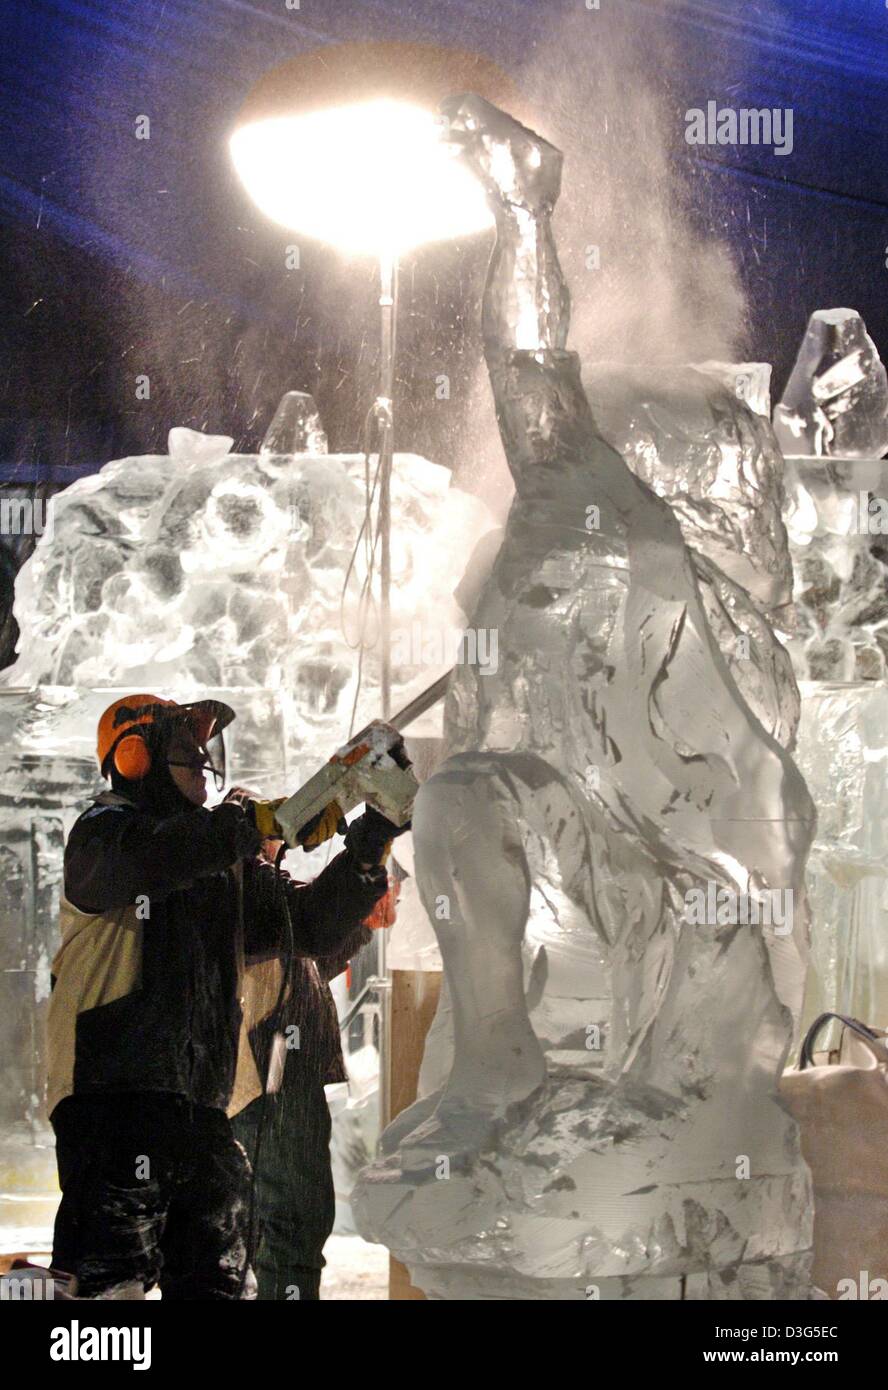 (dpa) - An artist with a chainsaw works on an ice sculpture for the Ice World exhibition in Luebeck, Germany, 27 November 2003. The exhibition takes place in a tent which is cooled down to minus 10 degree Celsius and runs from 12 December 2003 until 25 January 2004. Stock Photo